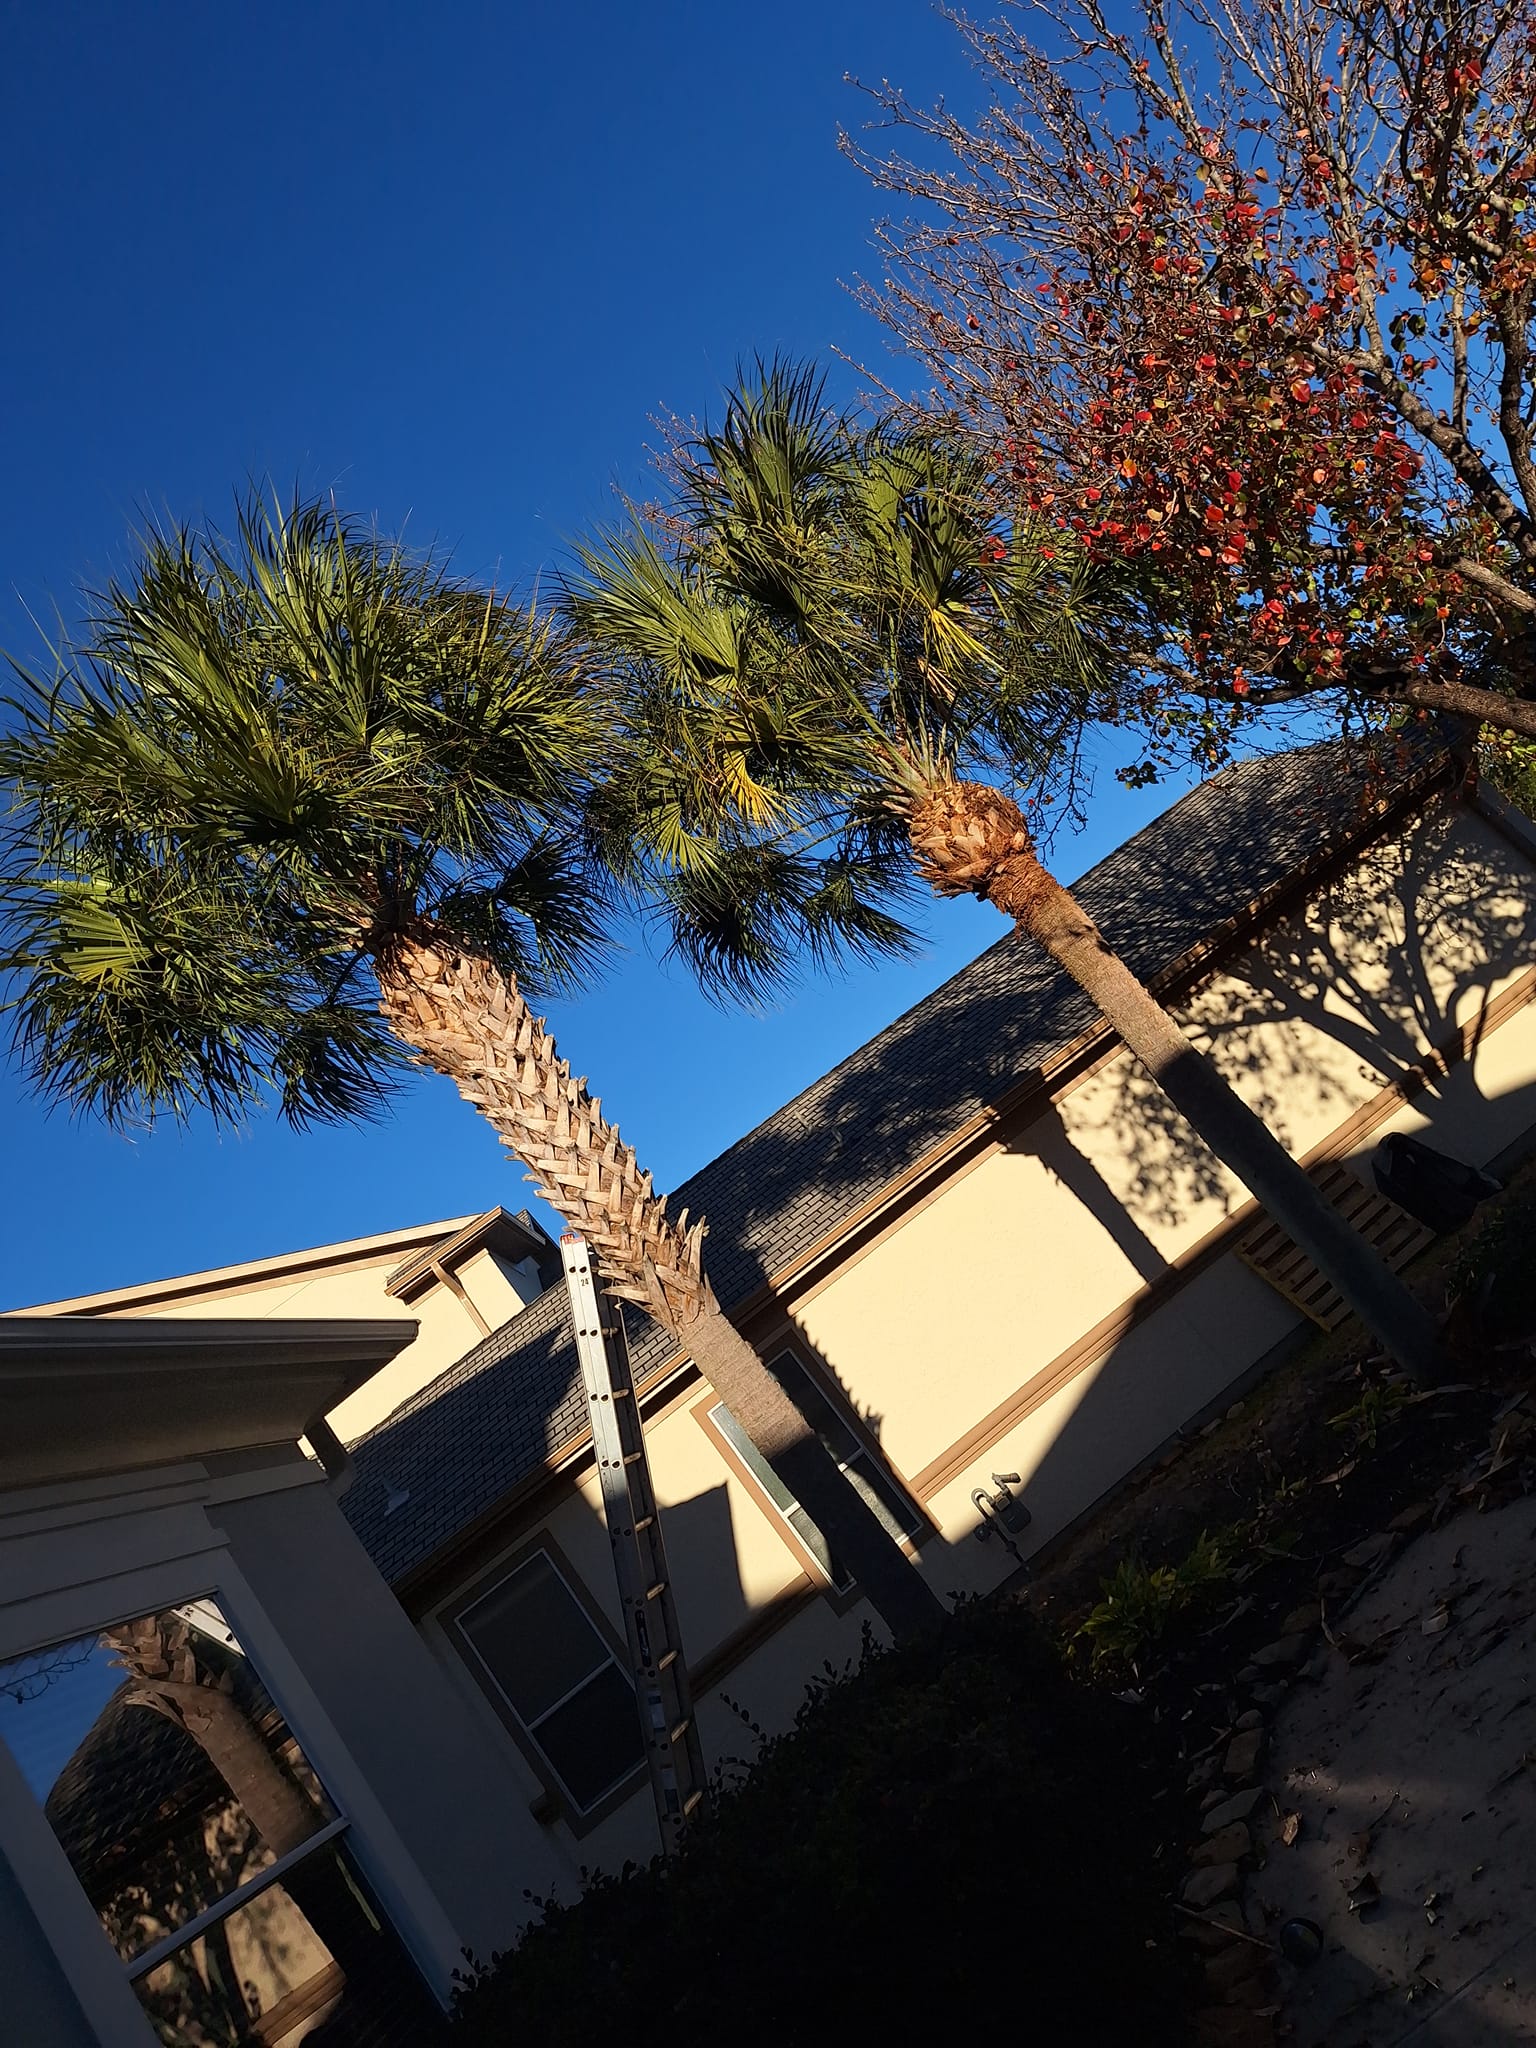 GARCIA'S TREE SERVICE AND LANDSCAPING